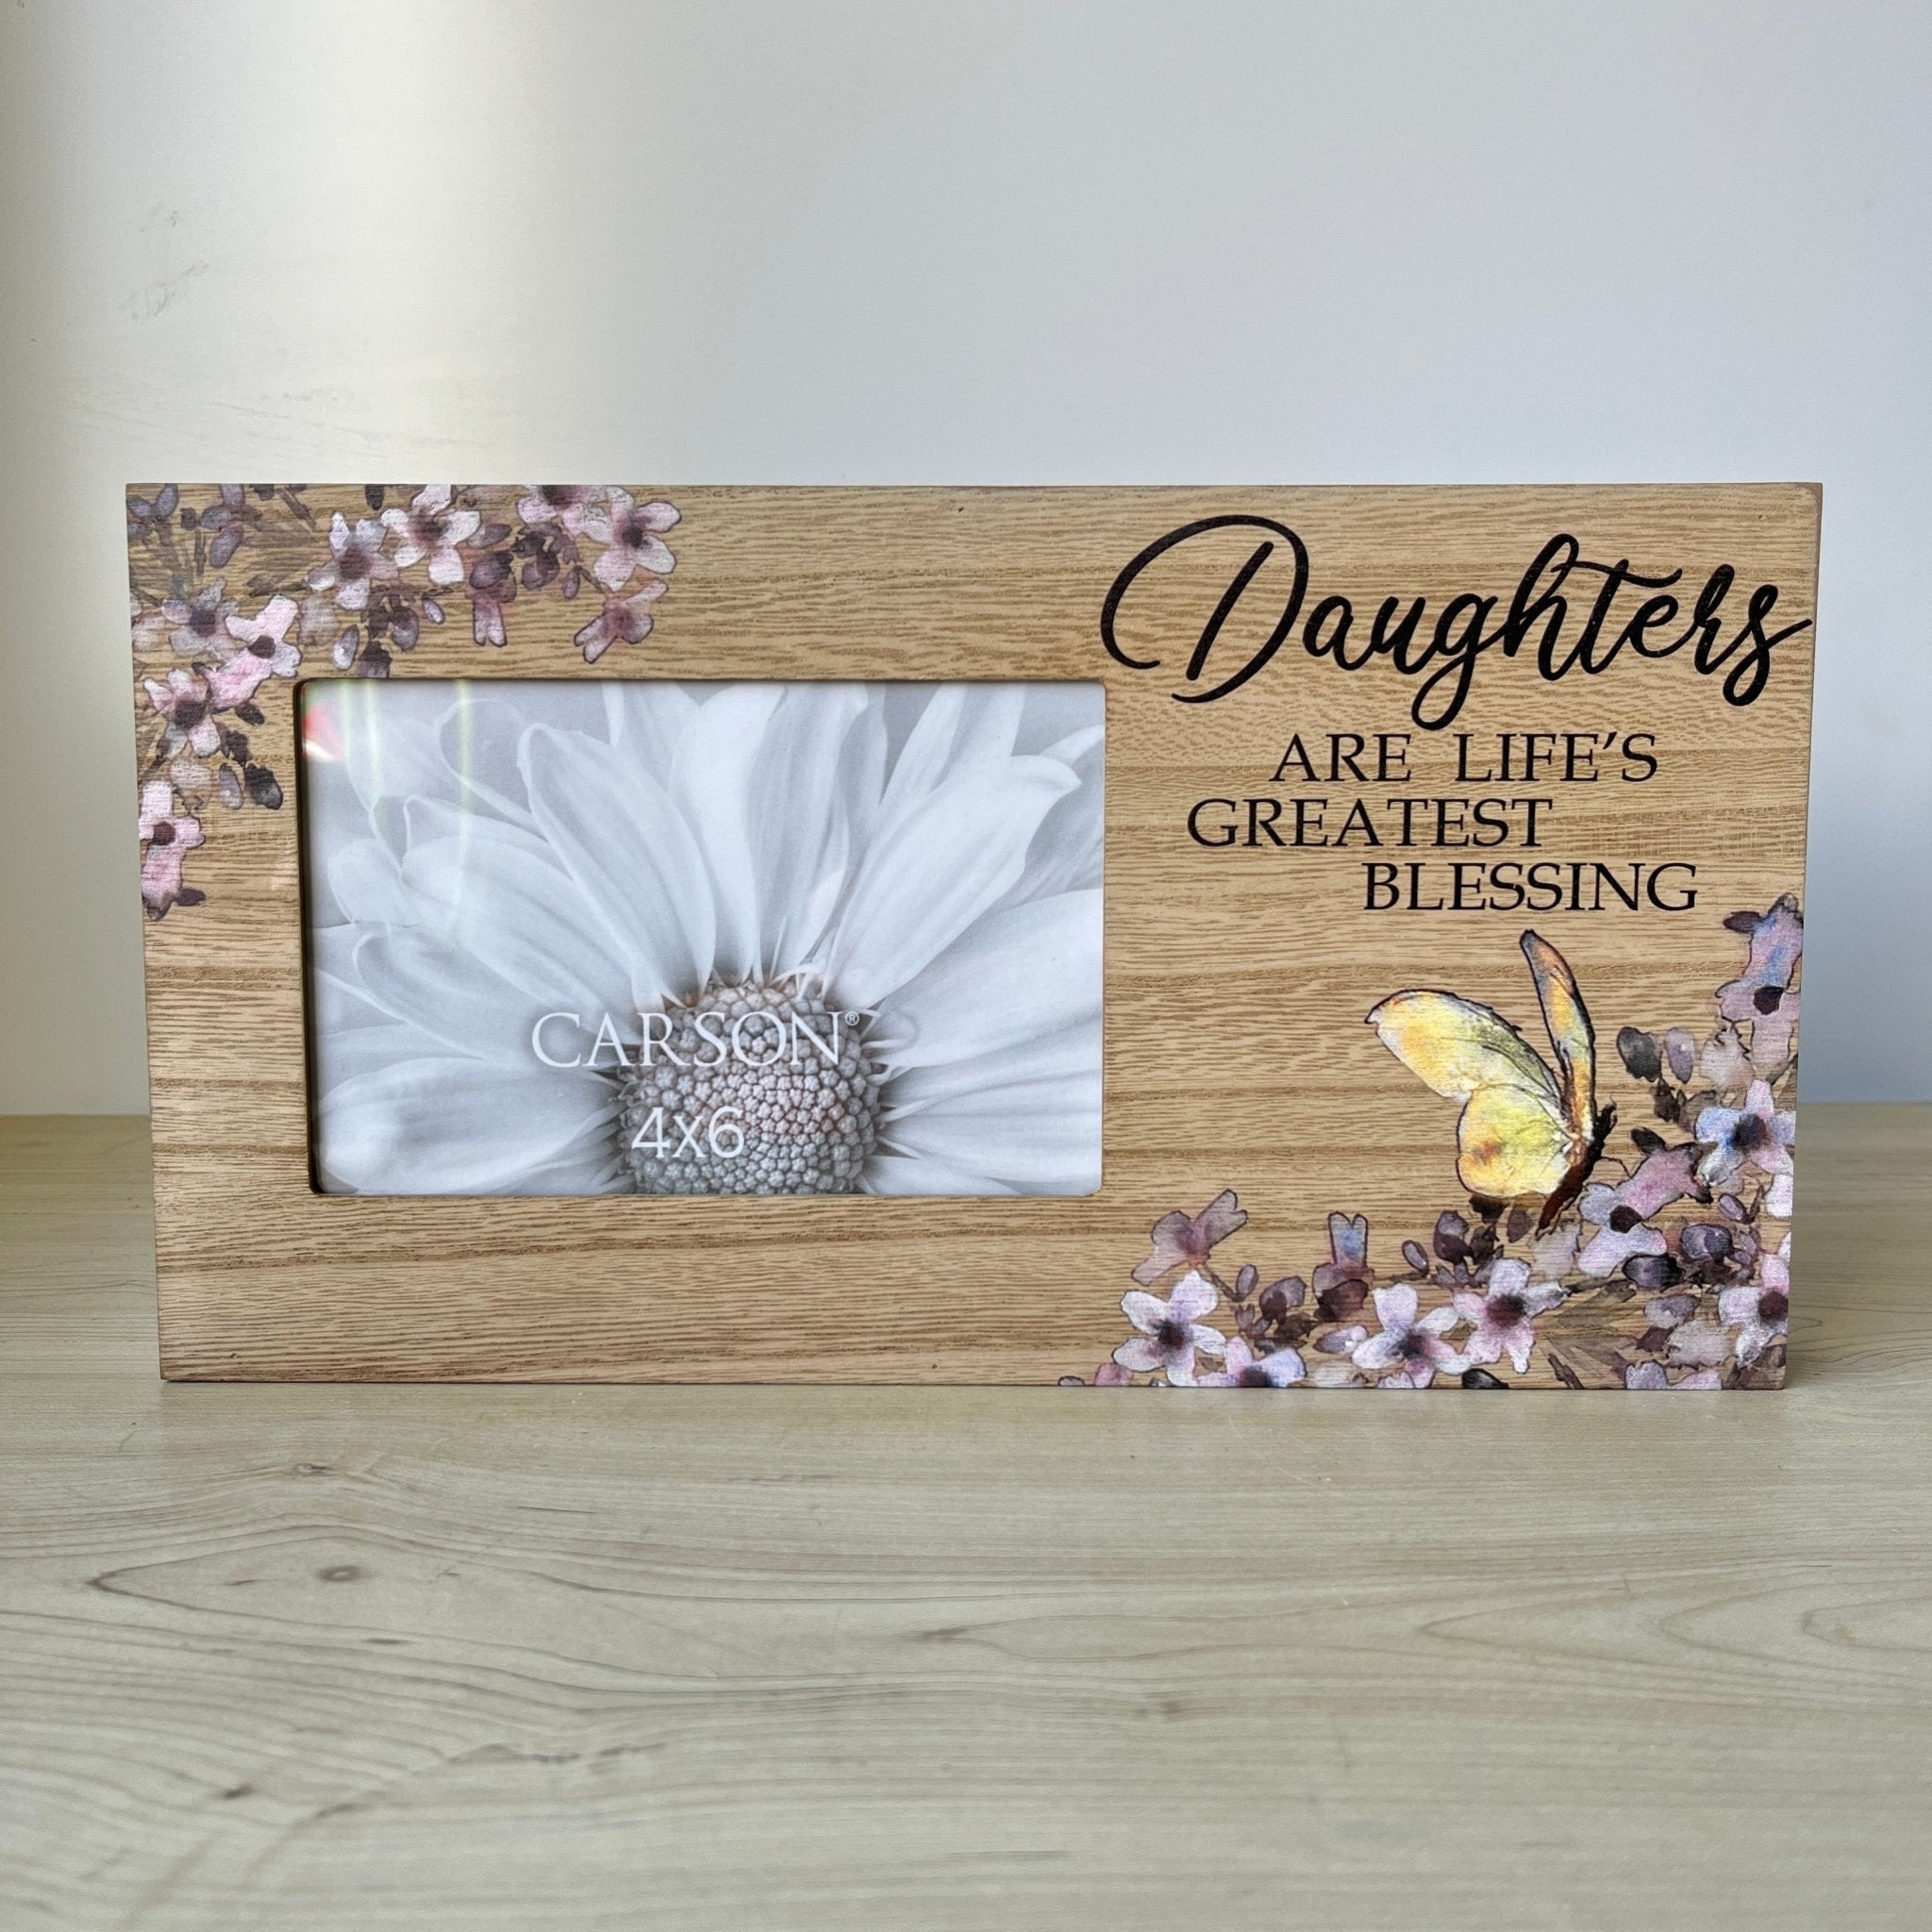 Daughters Photo Frame